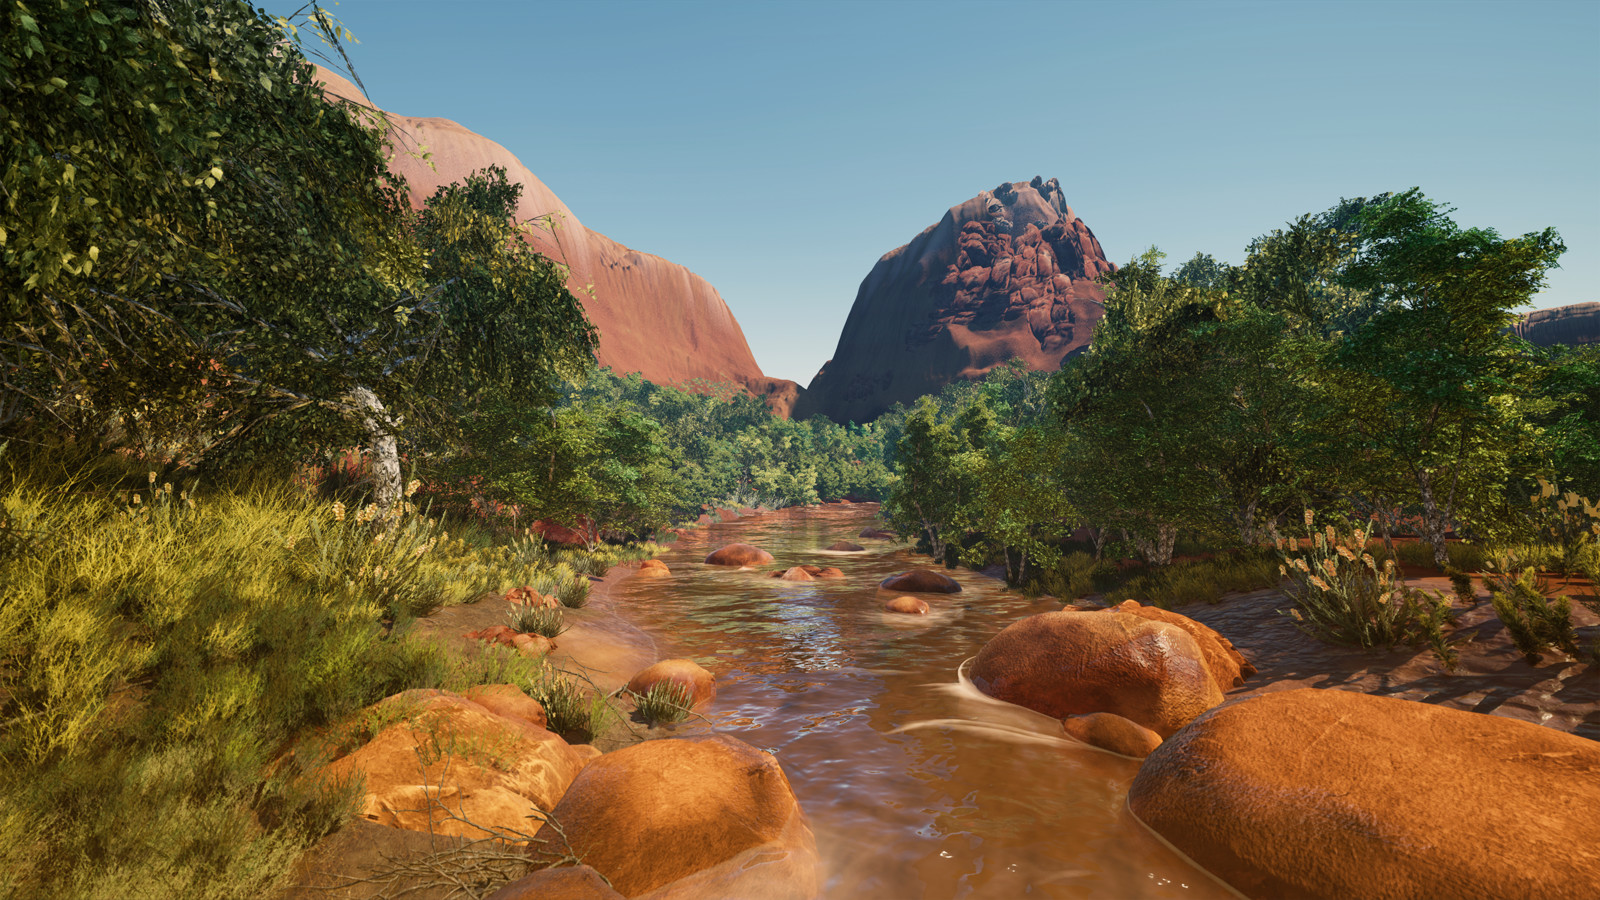 [UE4] Real Time Environment - Zion Canyon Angel's Landing Overlook